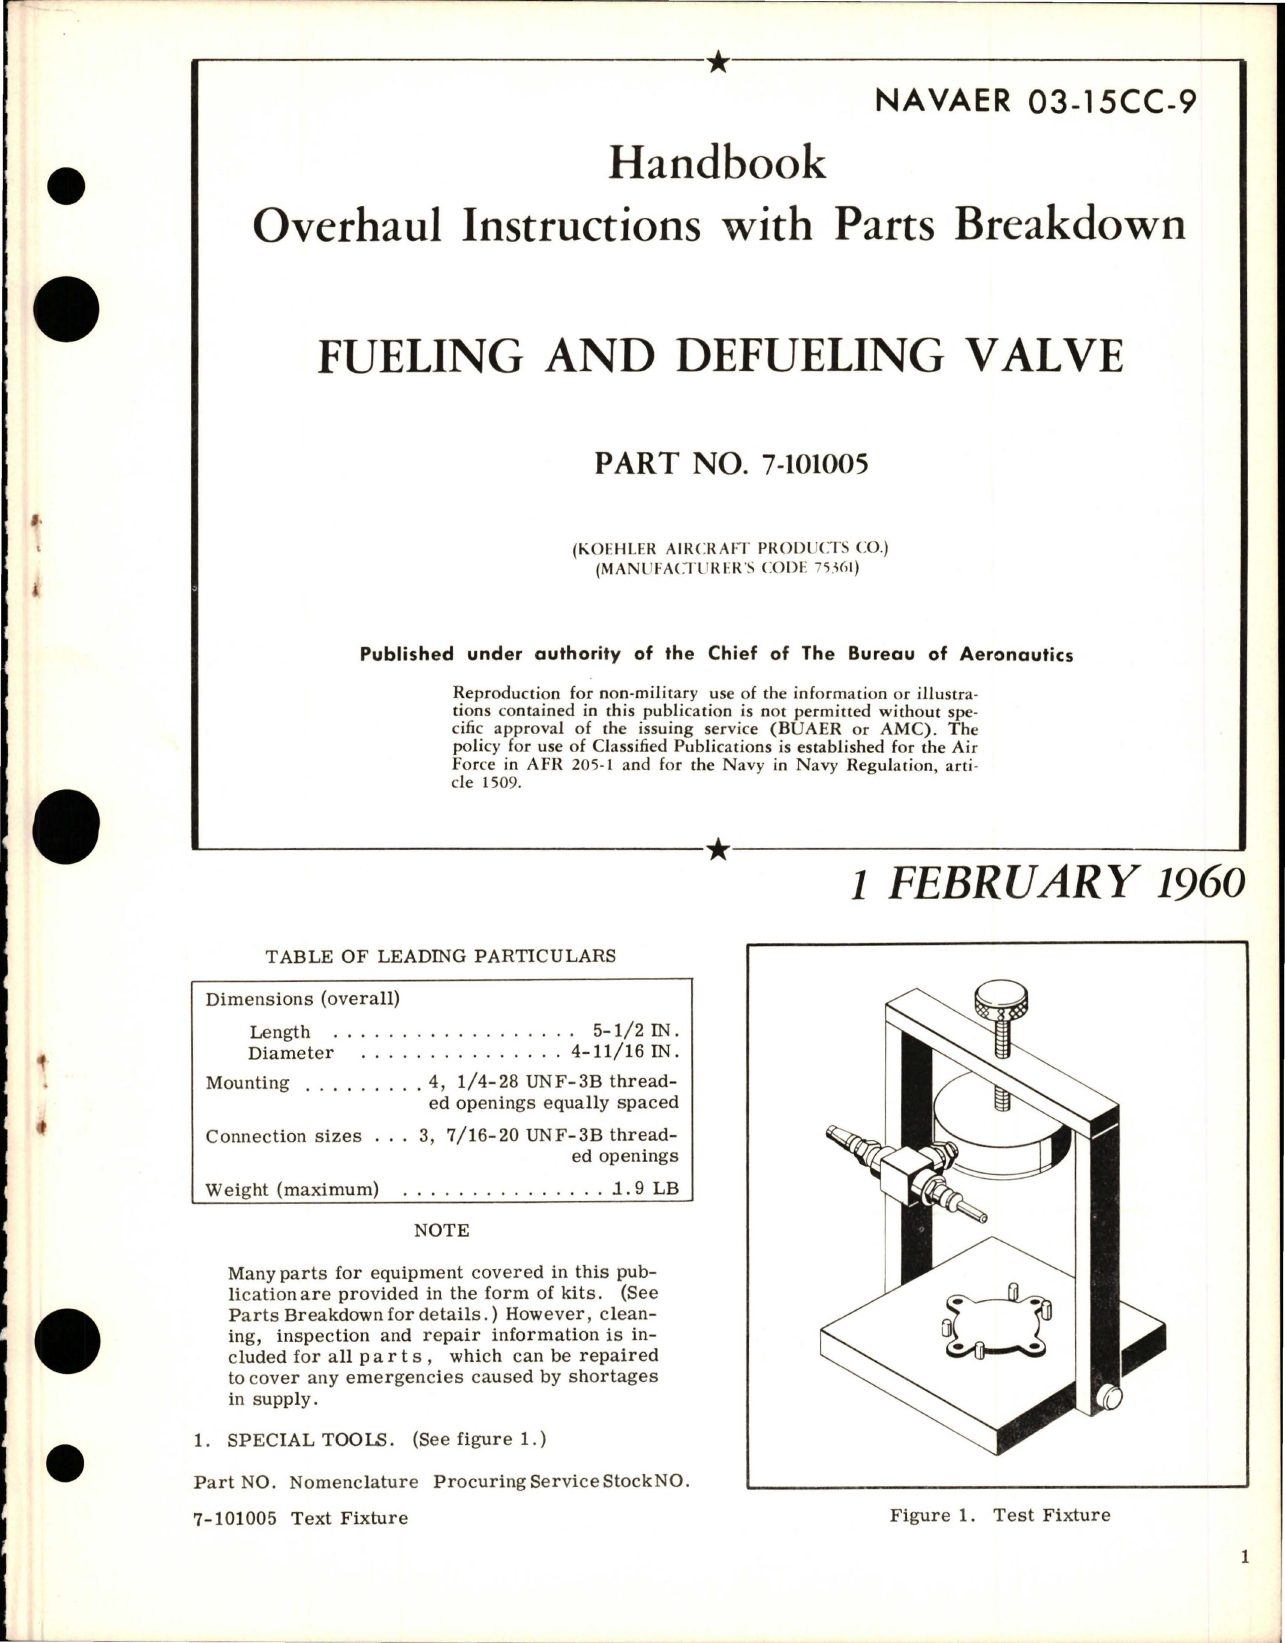 Sample page 1 from AirCorps Library document: Overhaul Instructions with Parts Breakdown for Fueling and Defueling Valve - Part 7-101005